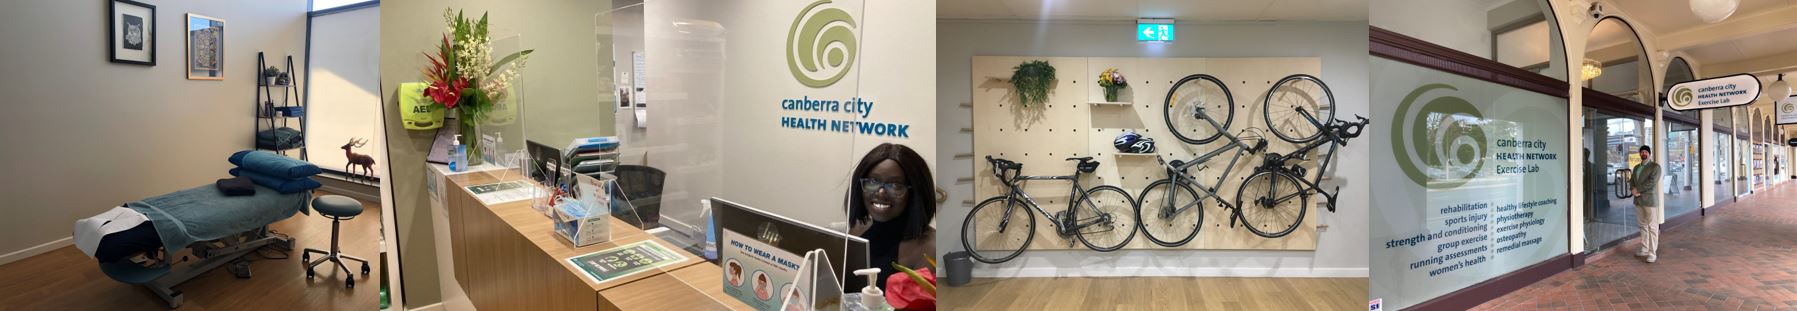 Canberra City Health Network Excercise Lab